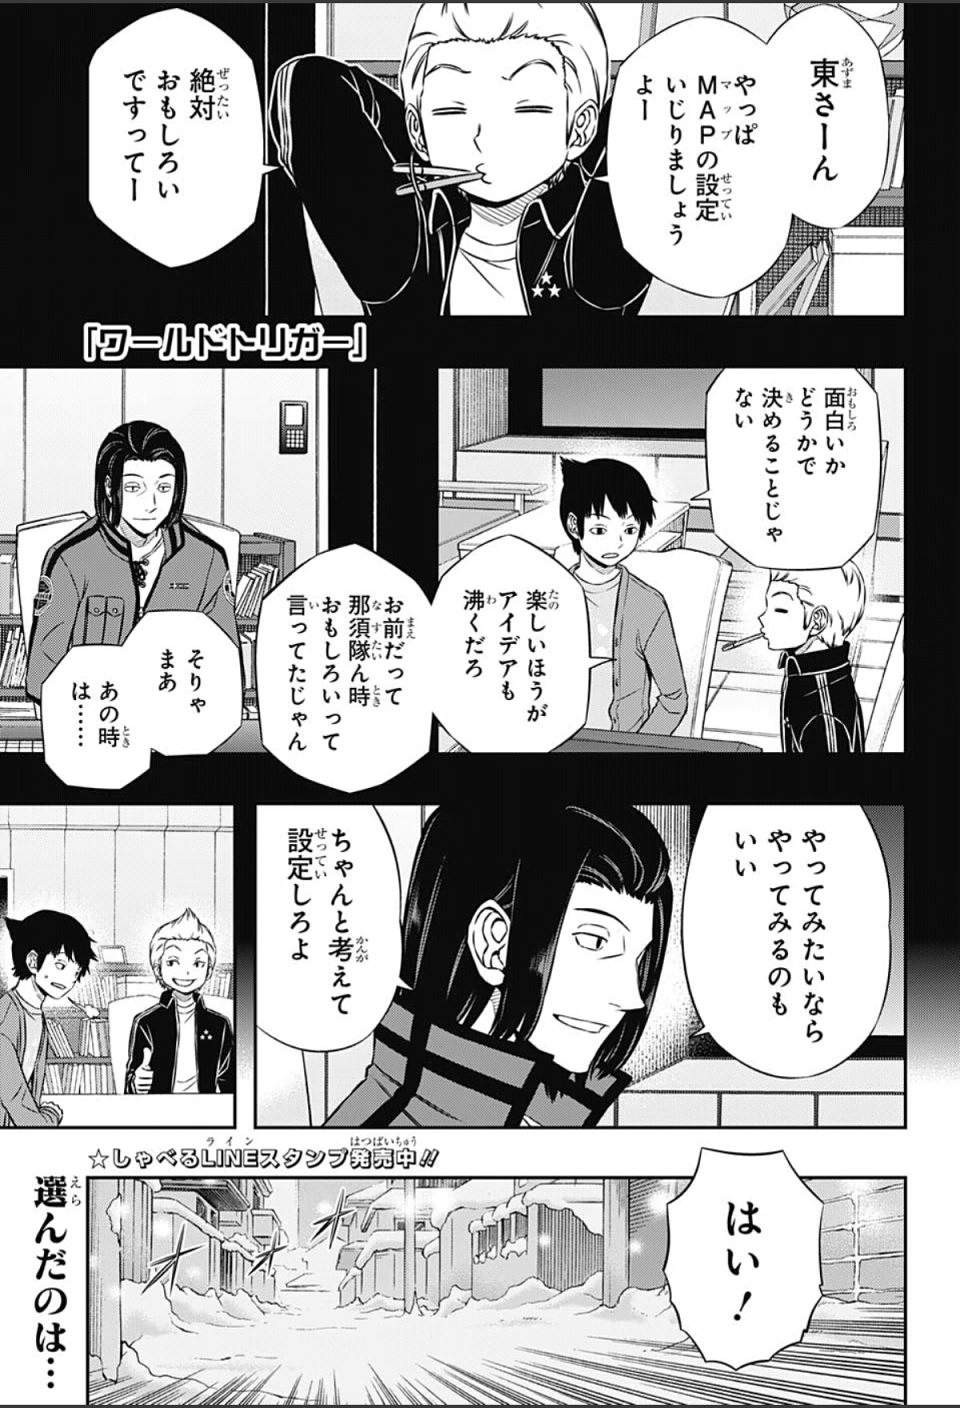 World Trigger - Chapter 111 - Page 1